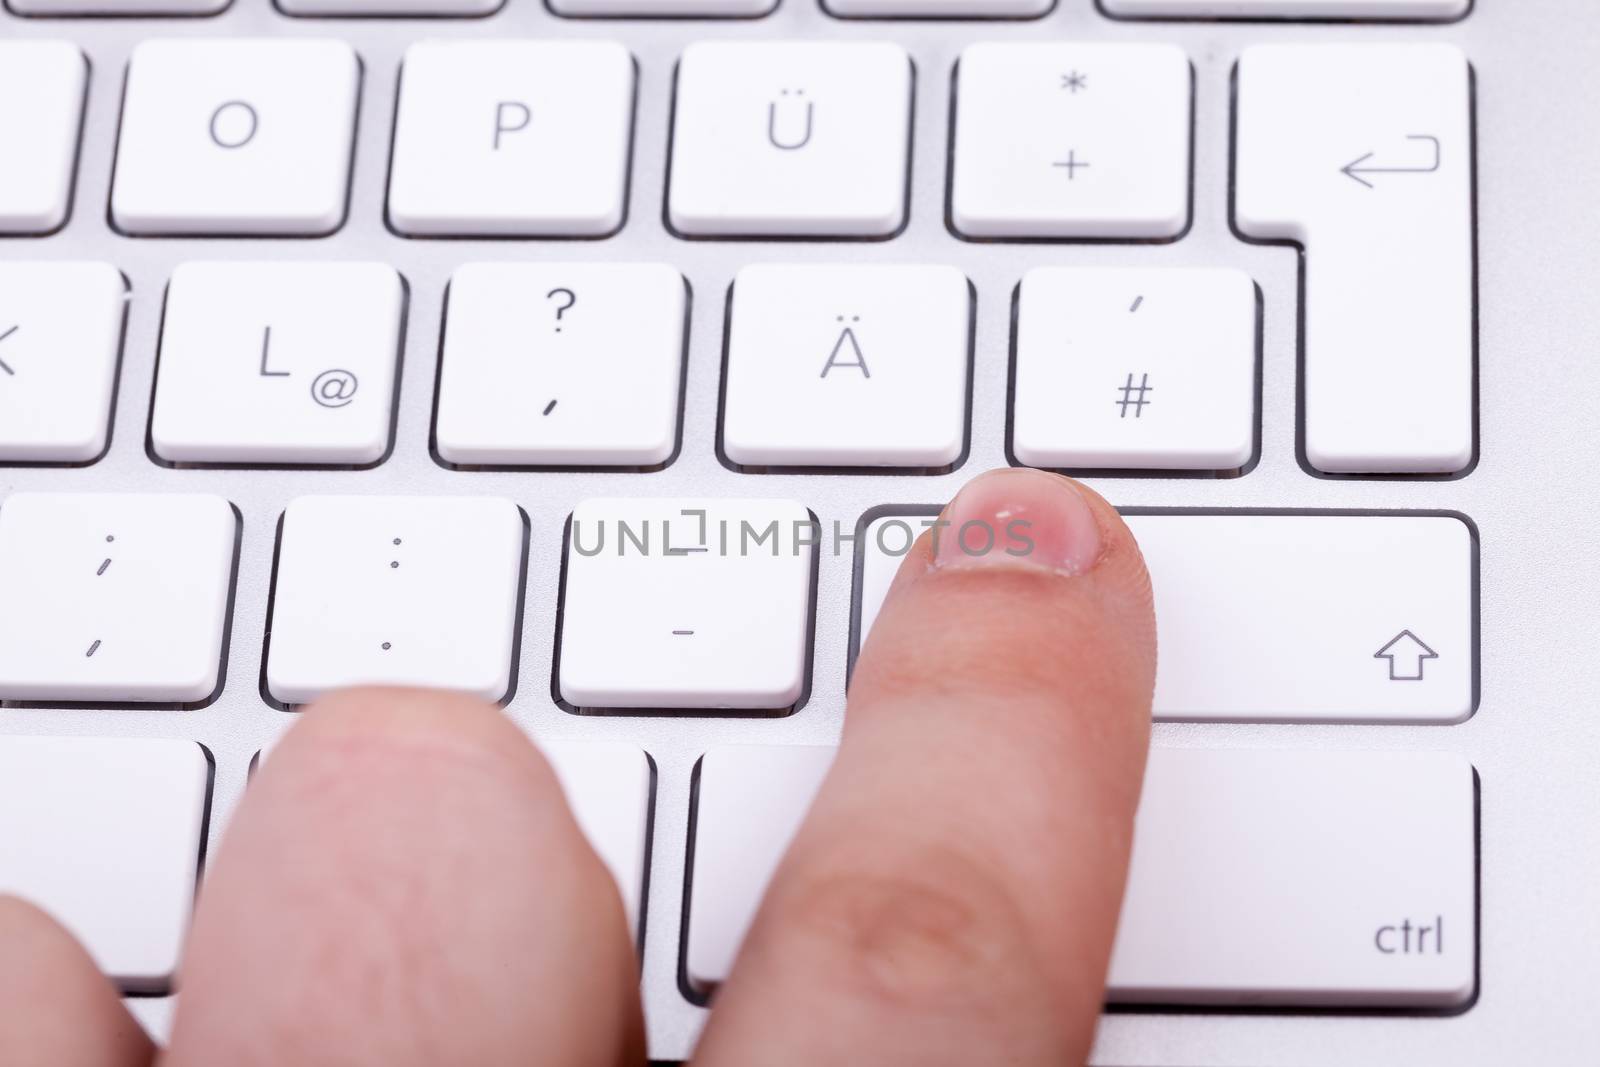 Finger pressing on keyboard key in close up